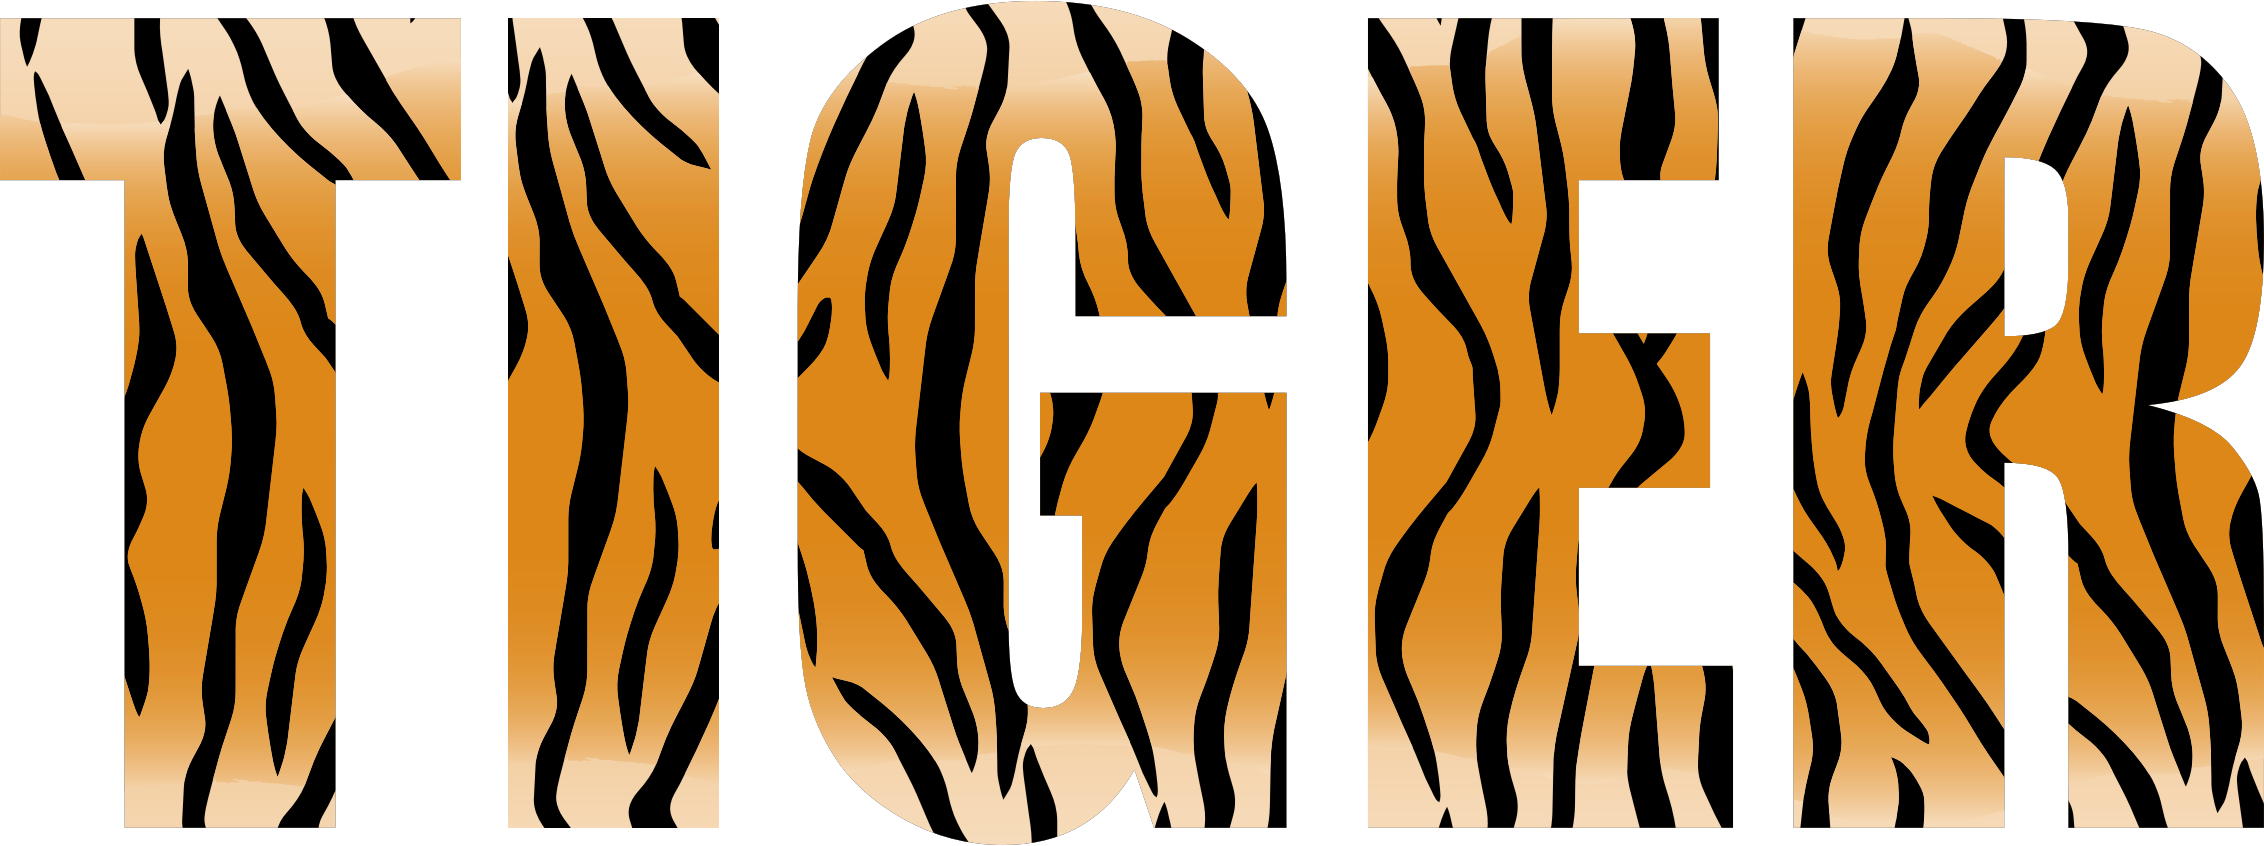 Clipart - Tiger Typography